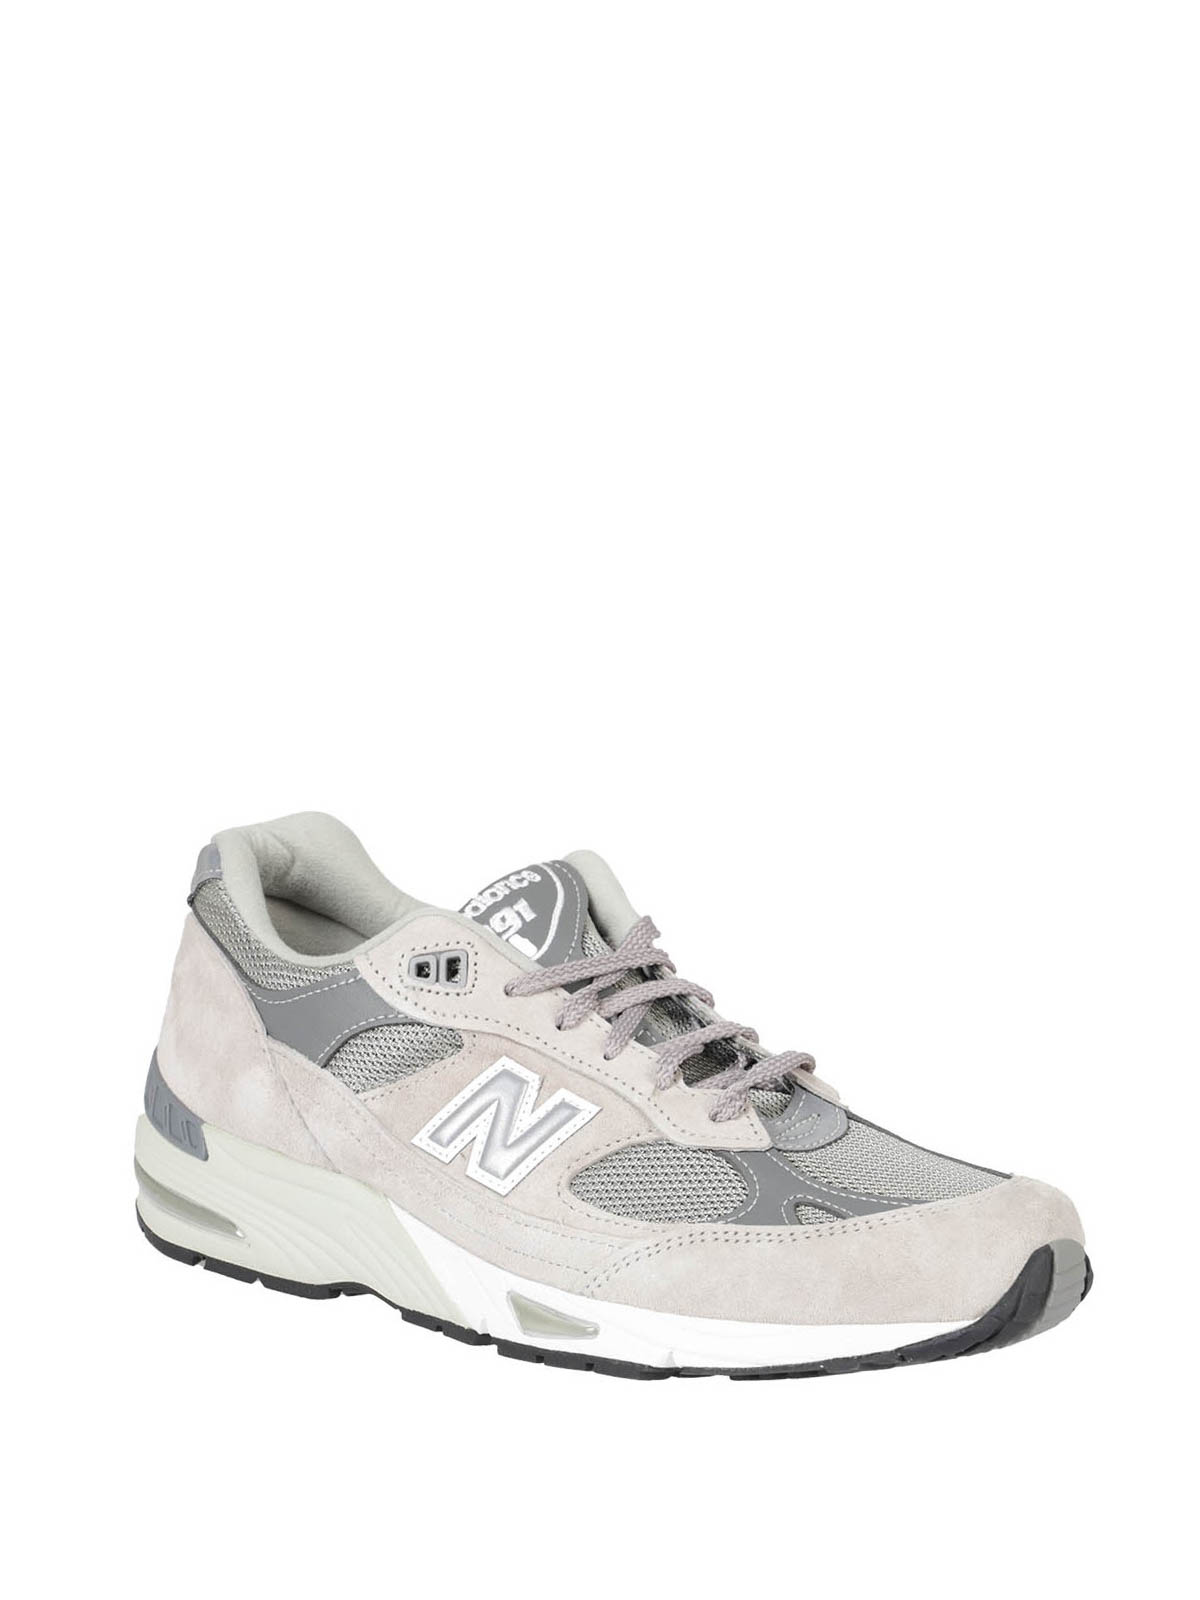 Trainers New Balance - 911 snekers - NBM991GLGRY | Shop online at ...